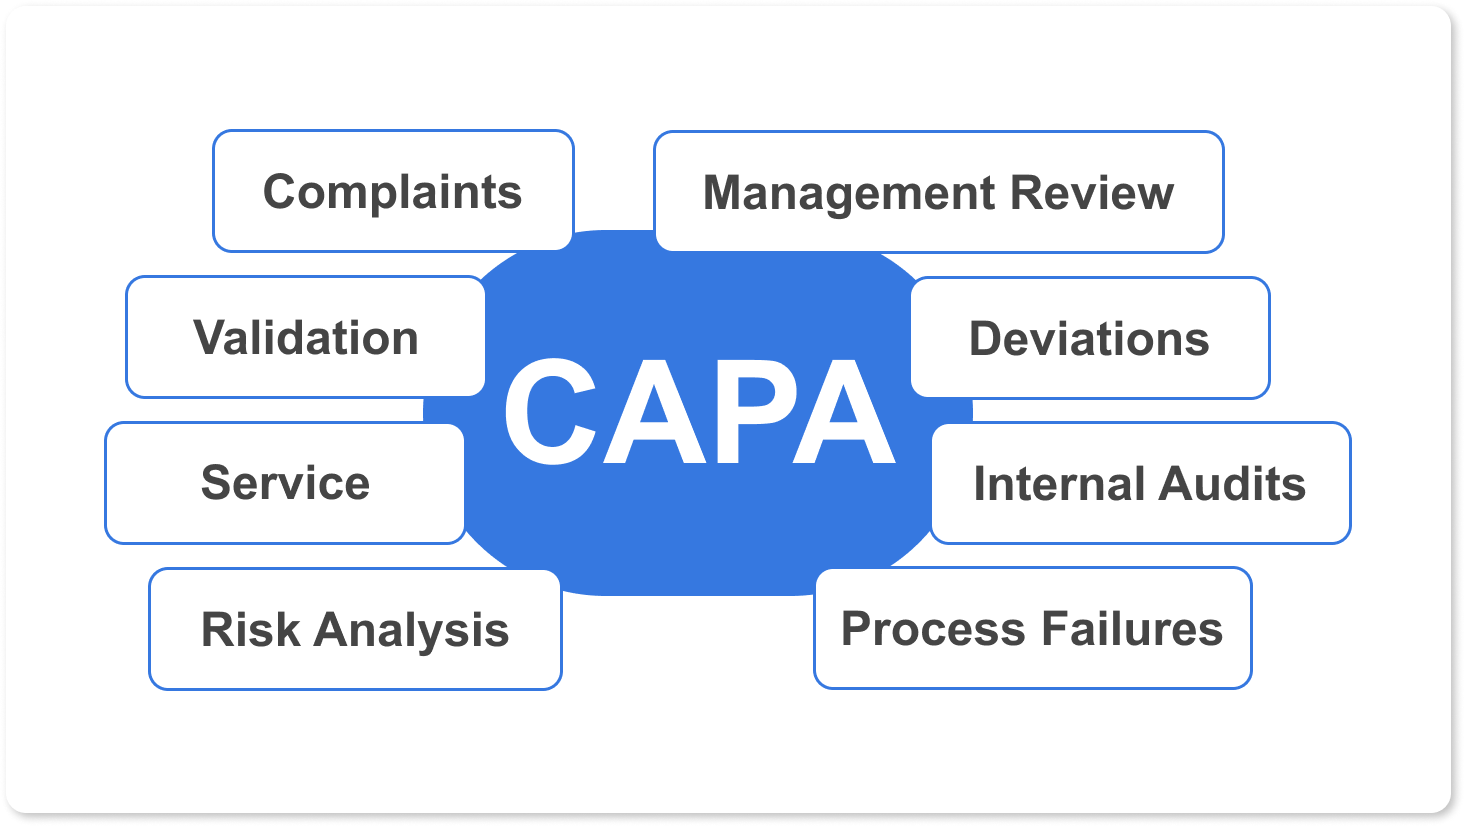 Corrective and Preventive Actions (CAPA)